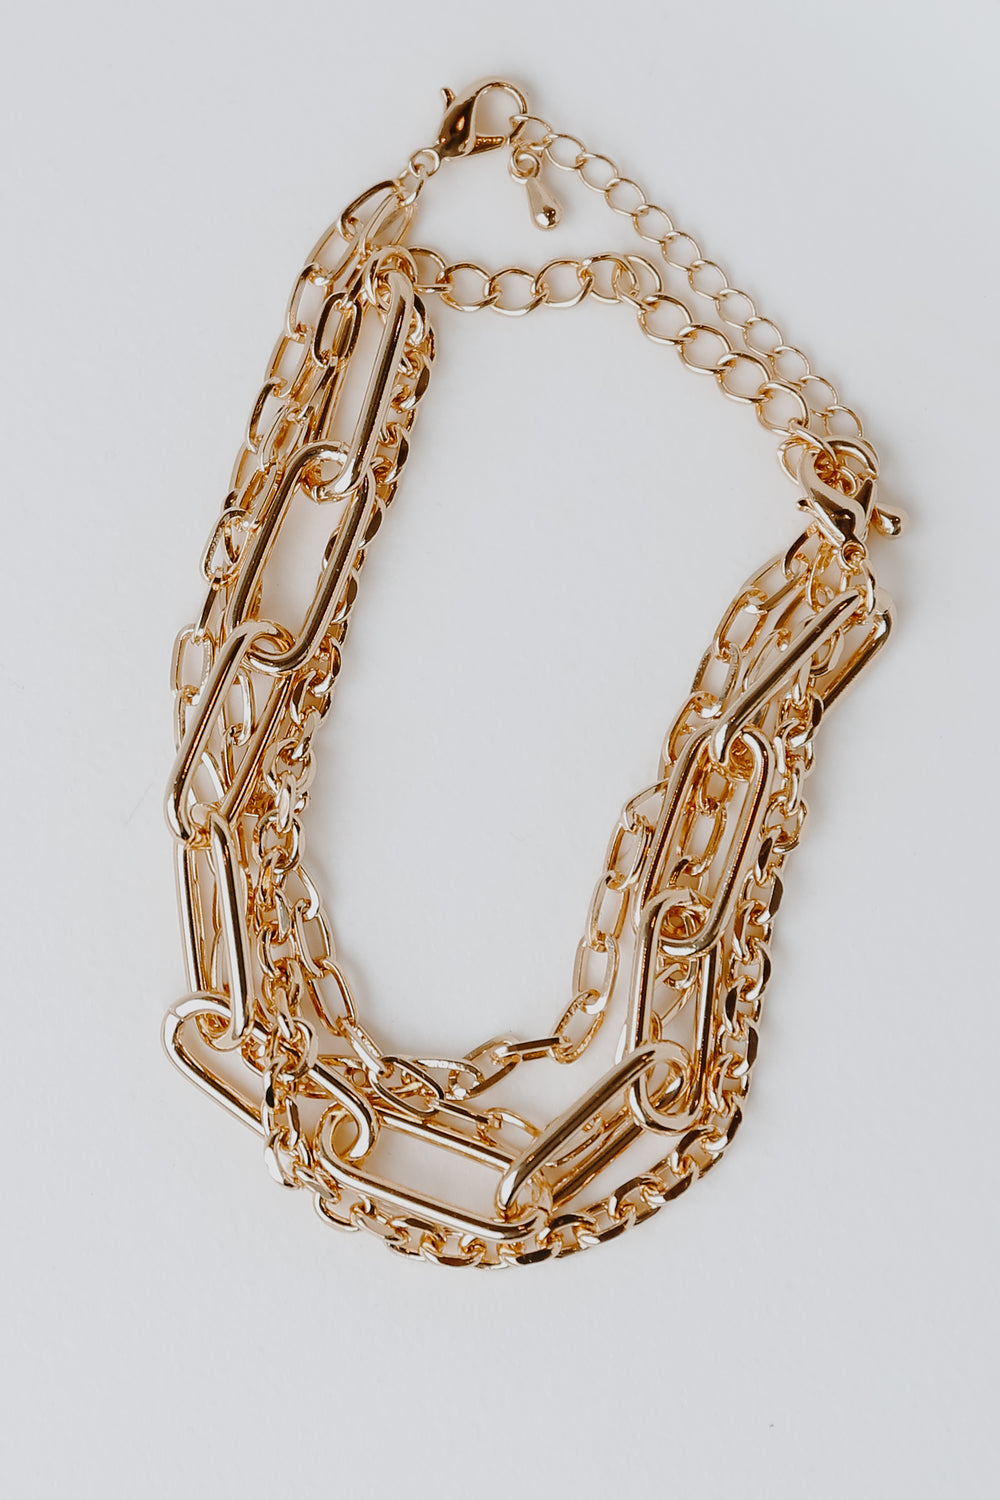 Gold Layered Chain Bracelet from dress up